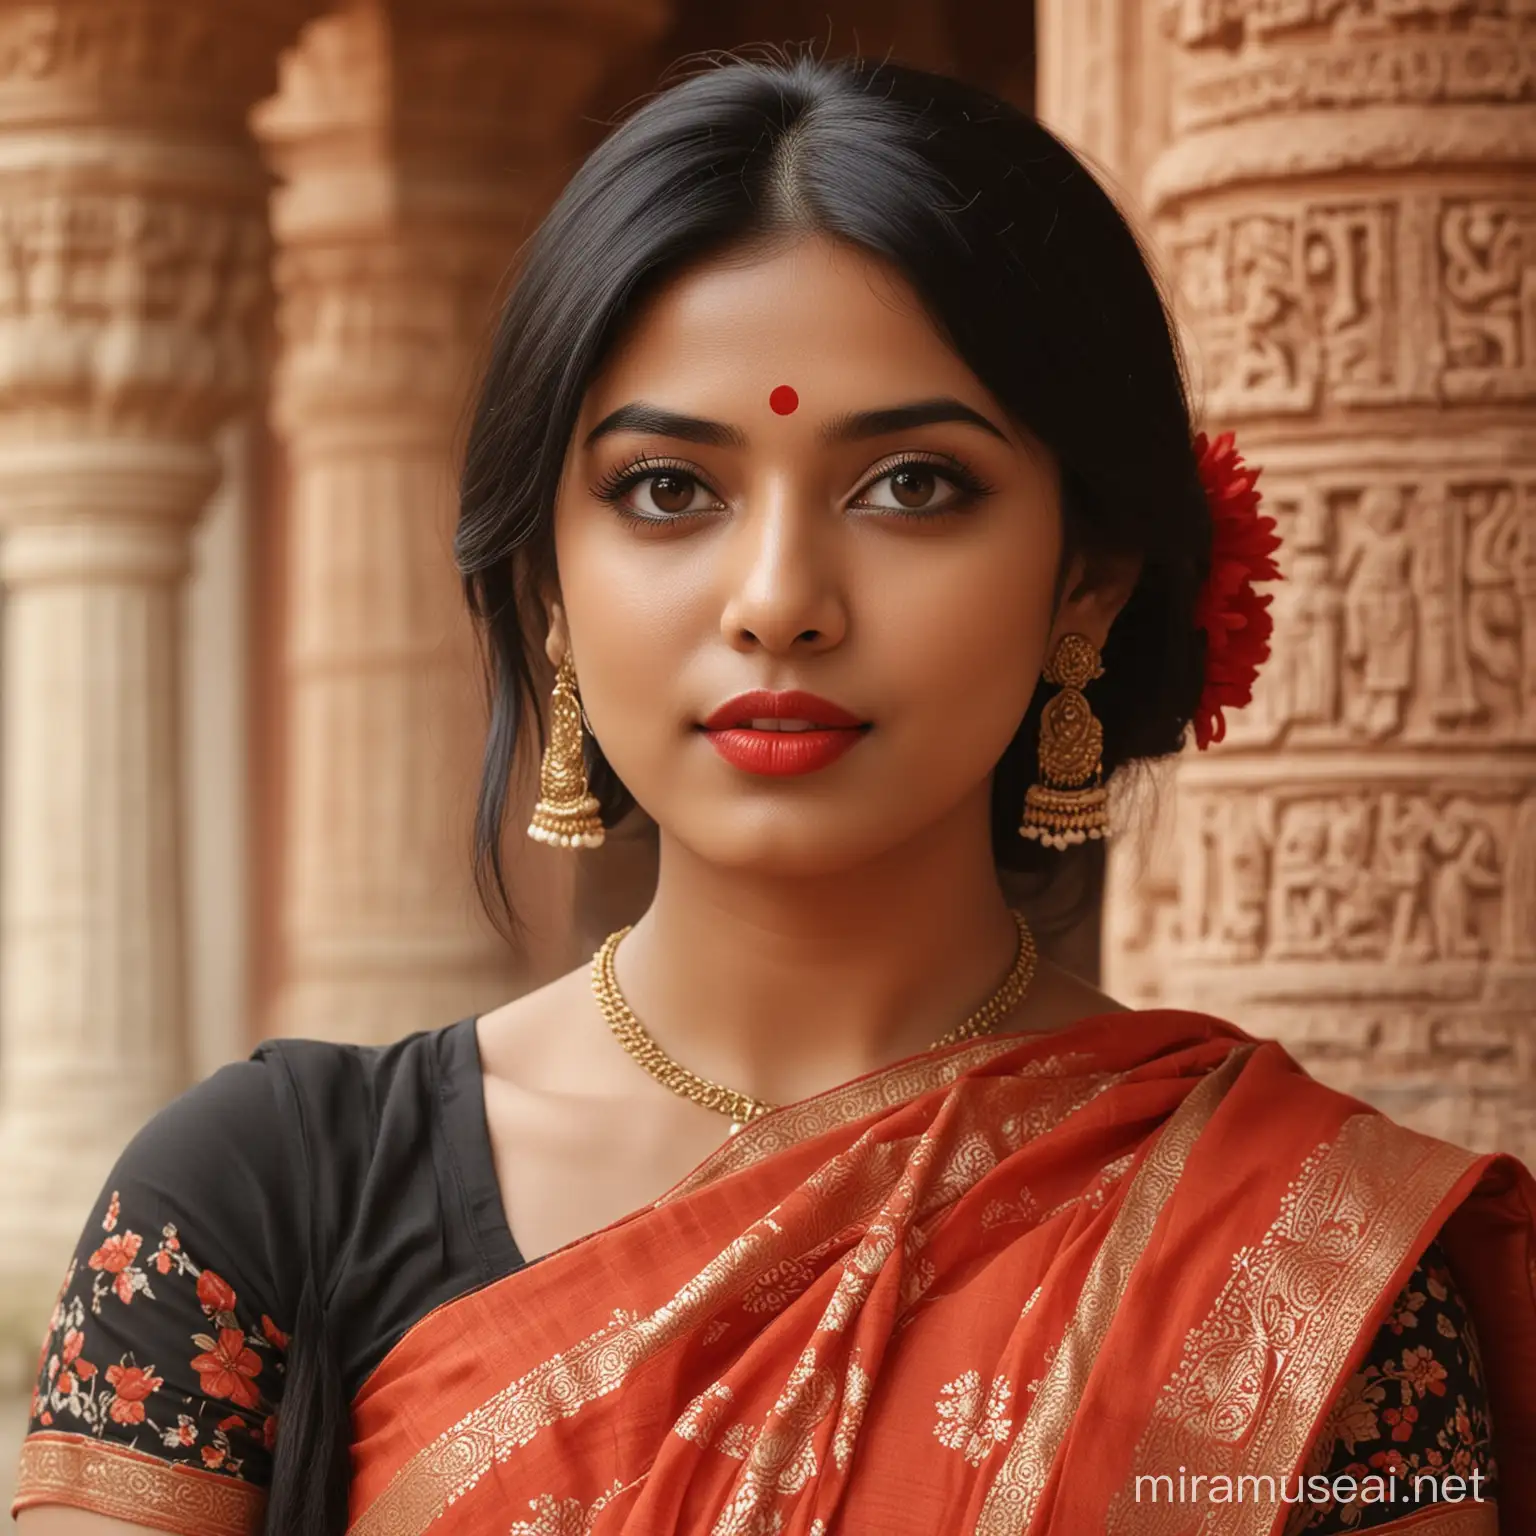 Beautiful Bengali Girl in Saree with Terracotta Temple Background